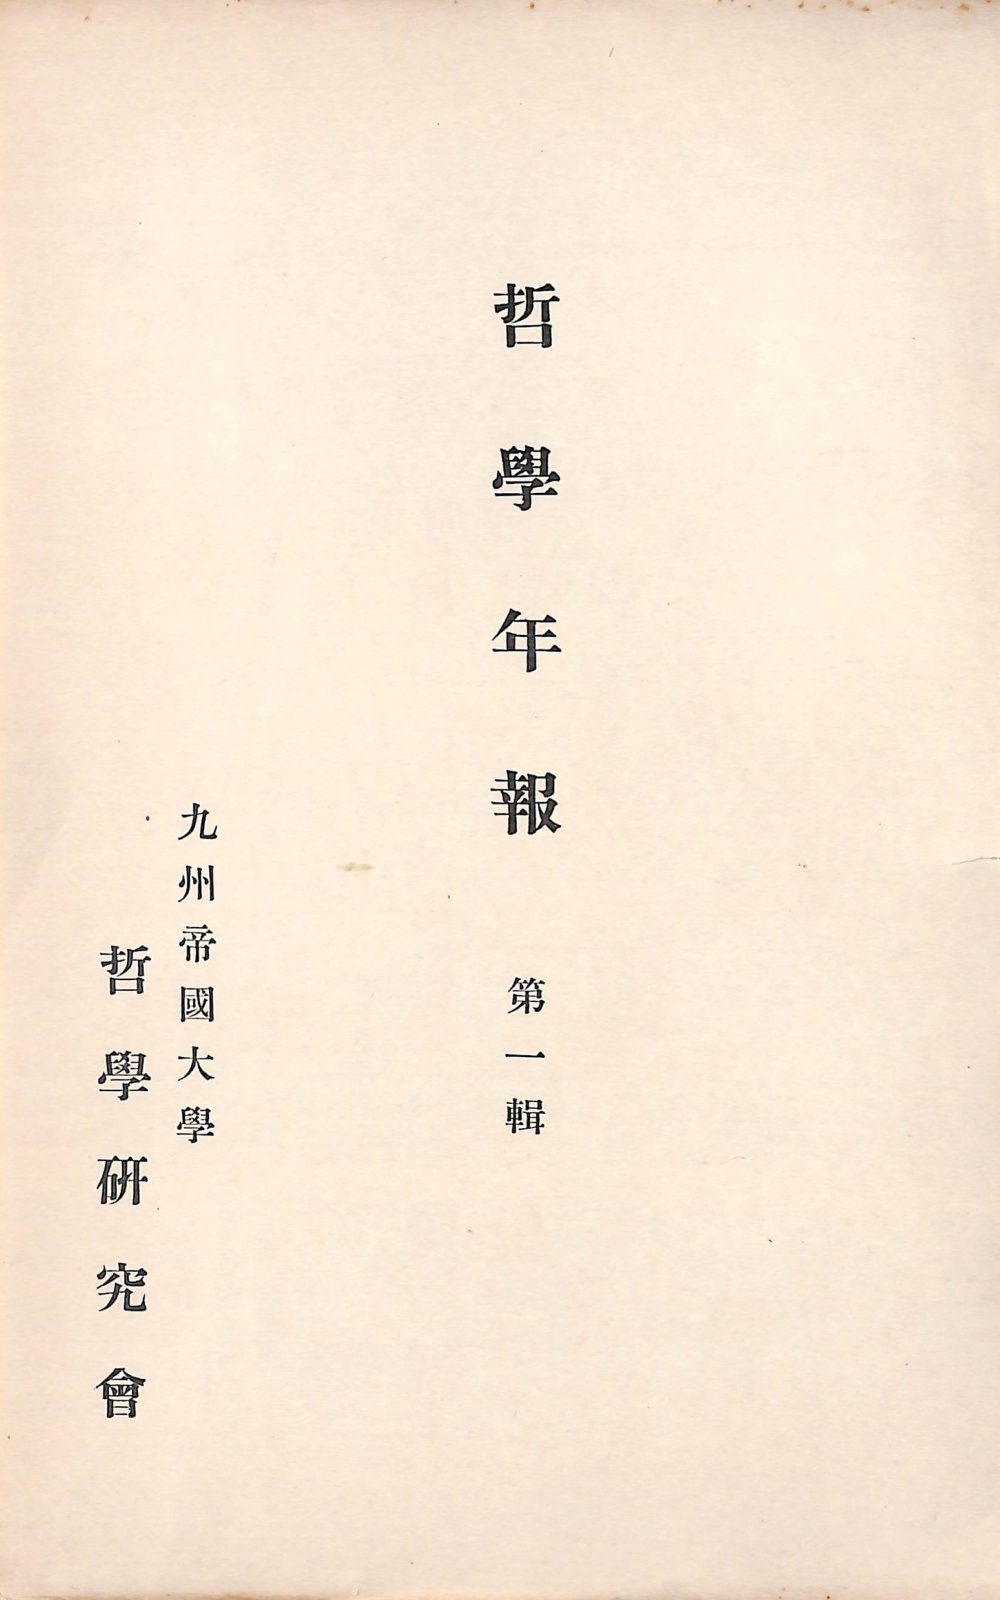 Tetsugaku nempo, Title page of the first number